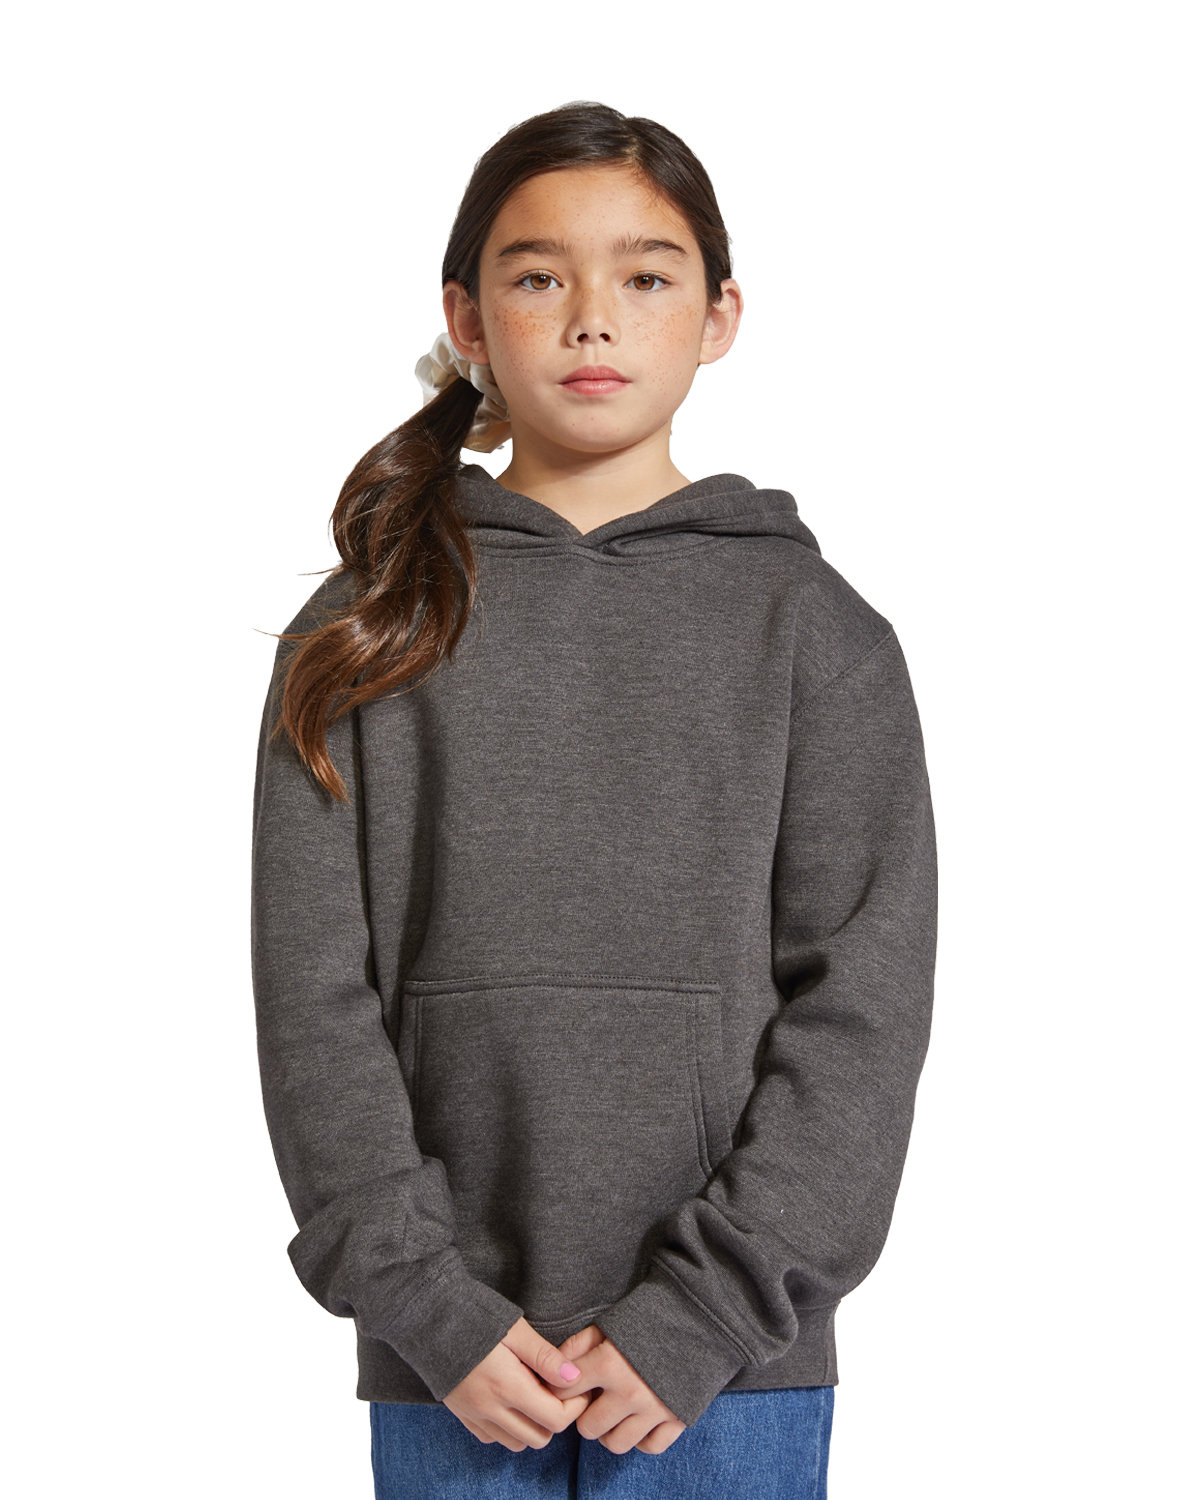 Lane Seven Youth Premium Pullover Hooded Sweatshirt CHARCOAL HEATHER 